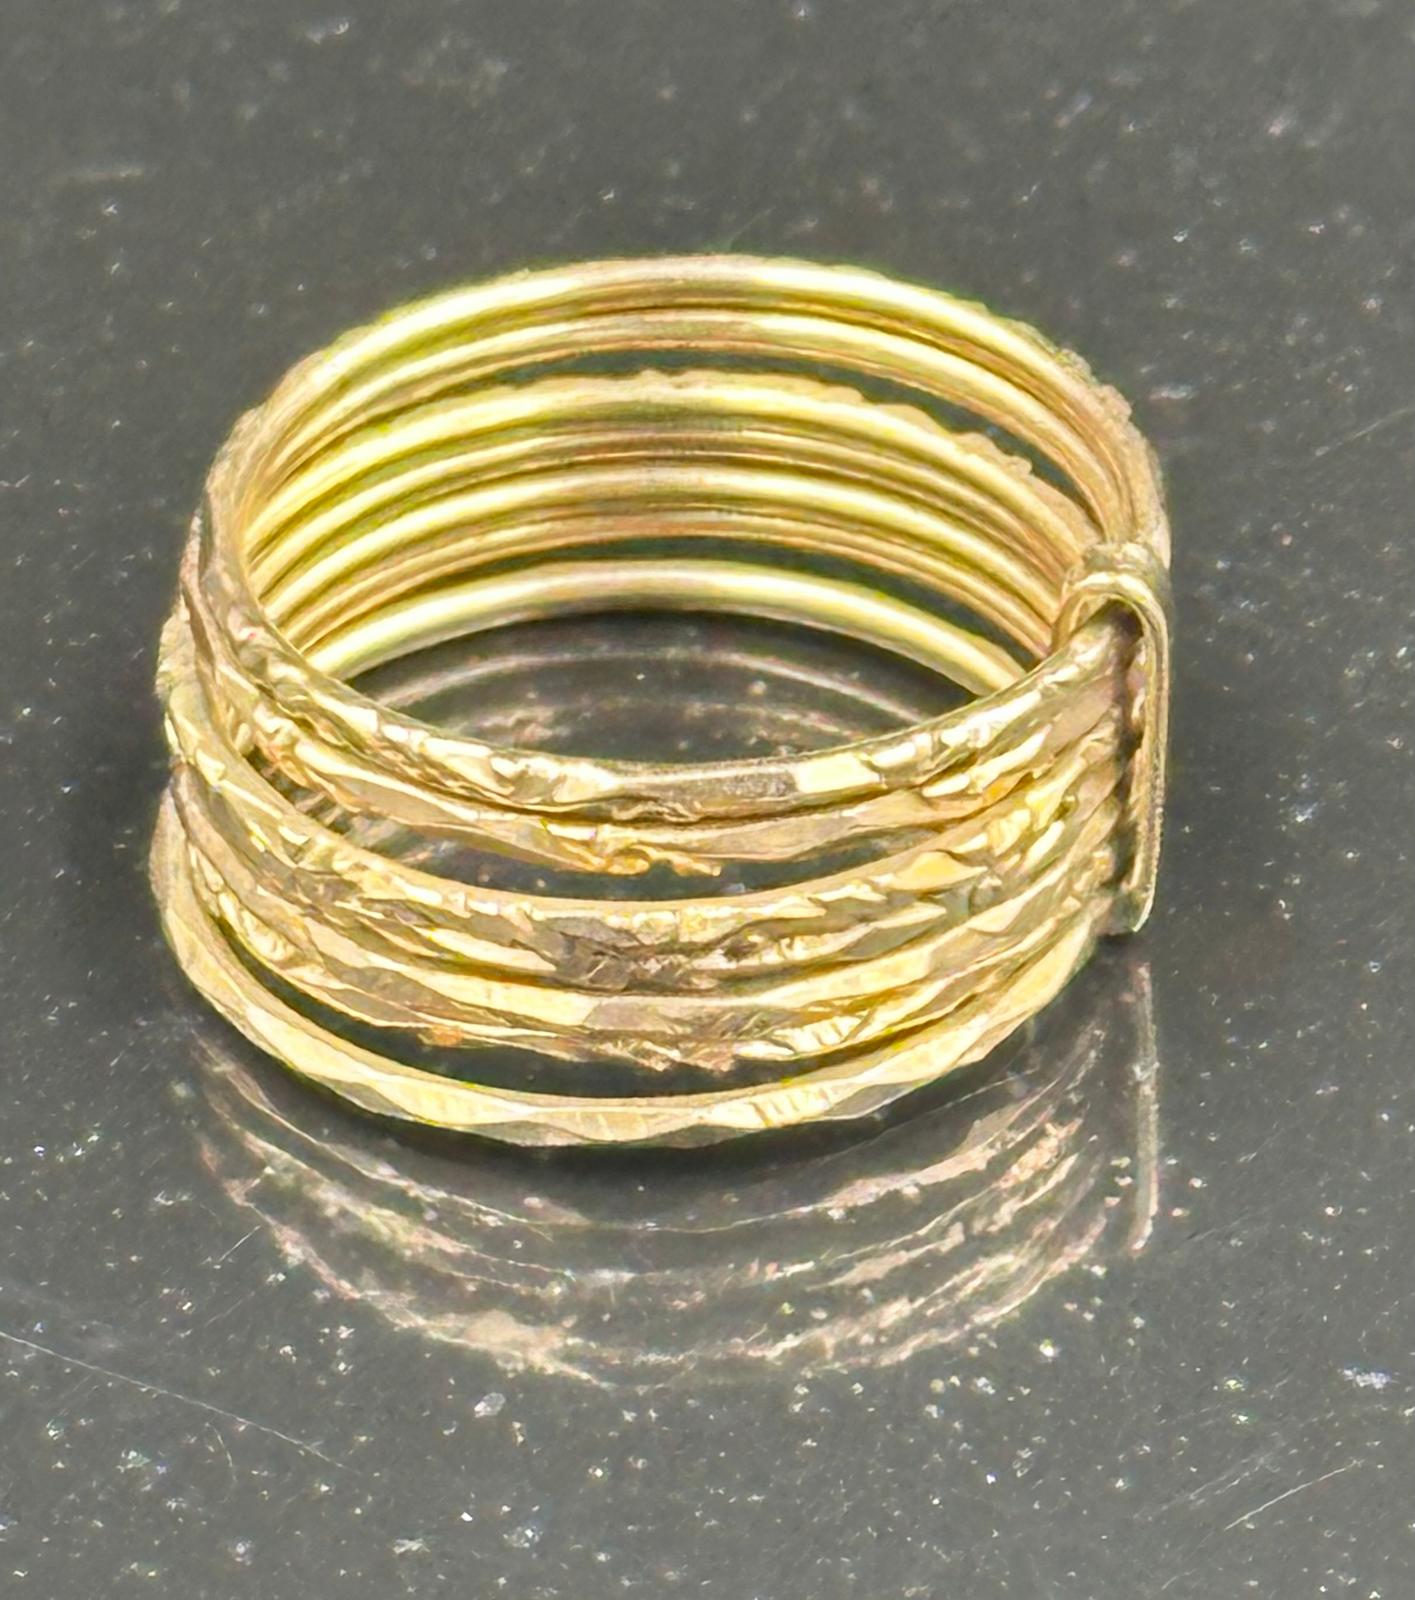 A 14ct gold fashion ring with multiple fine rings, approximate weight 3g